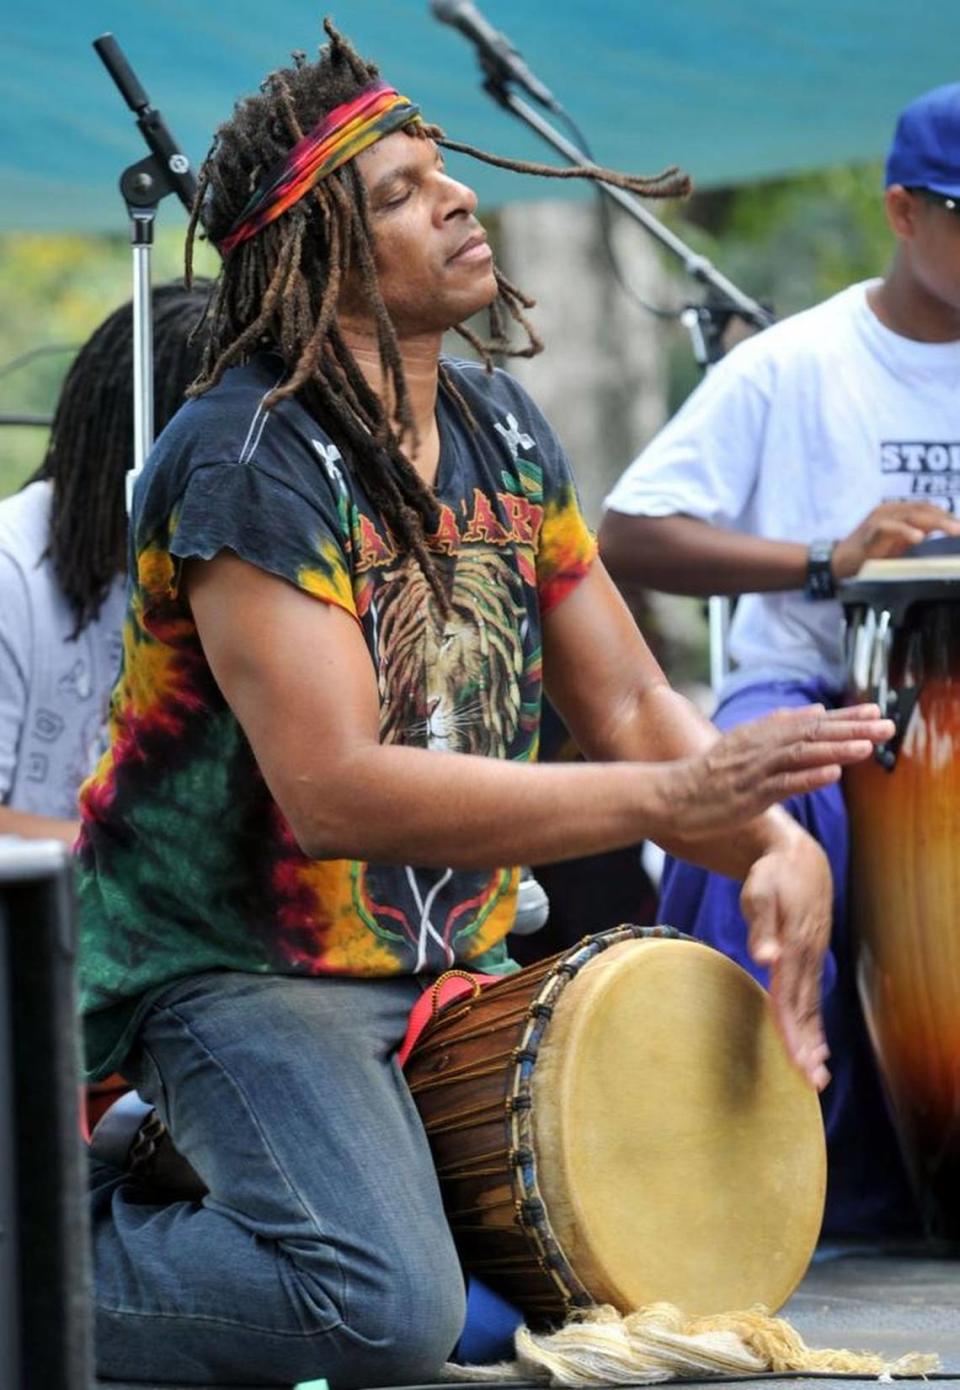 Dean Brown performs with a drum band during a previous year’s Juneteenth Festival at Tattnall Square Park.